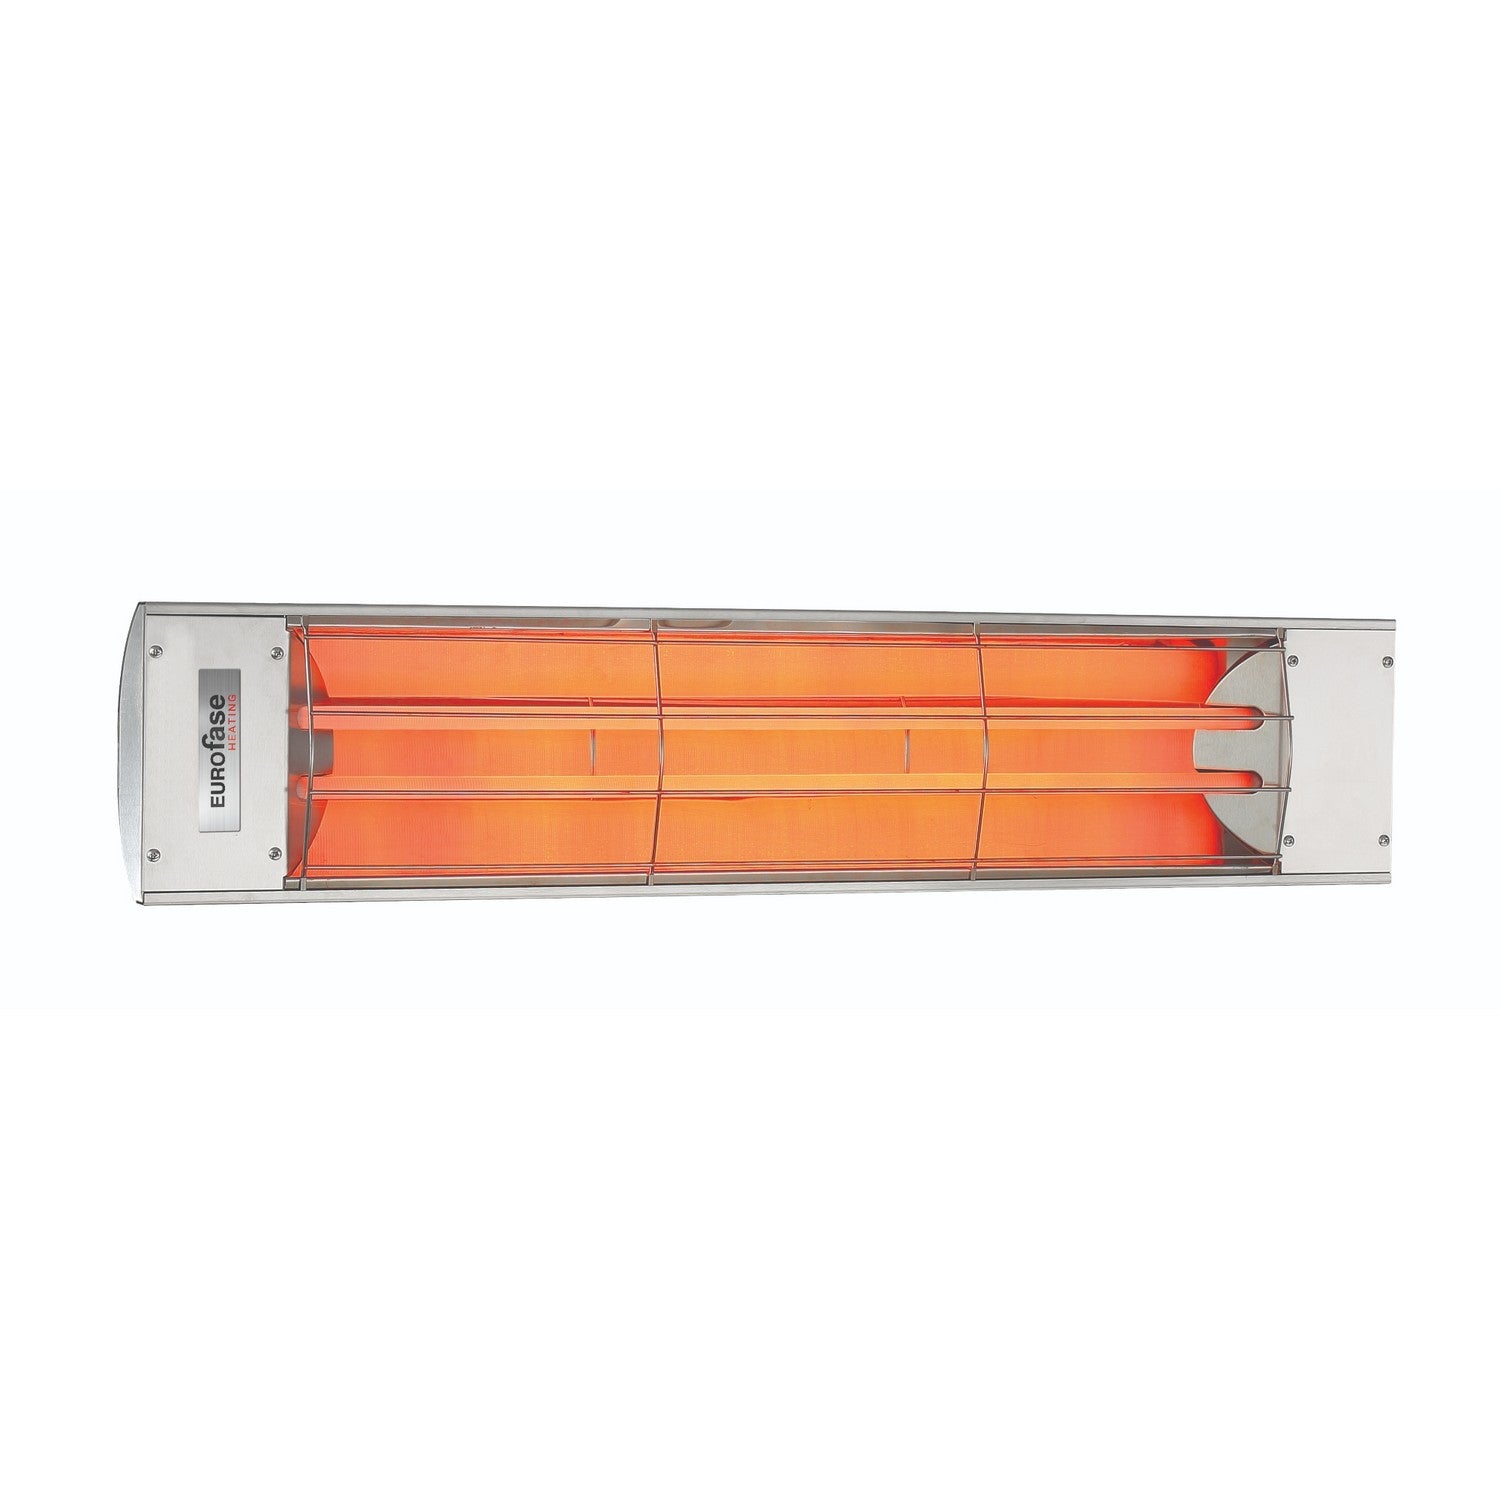 Eurofase - EF50240S - Electric Heater - Stainless Steel